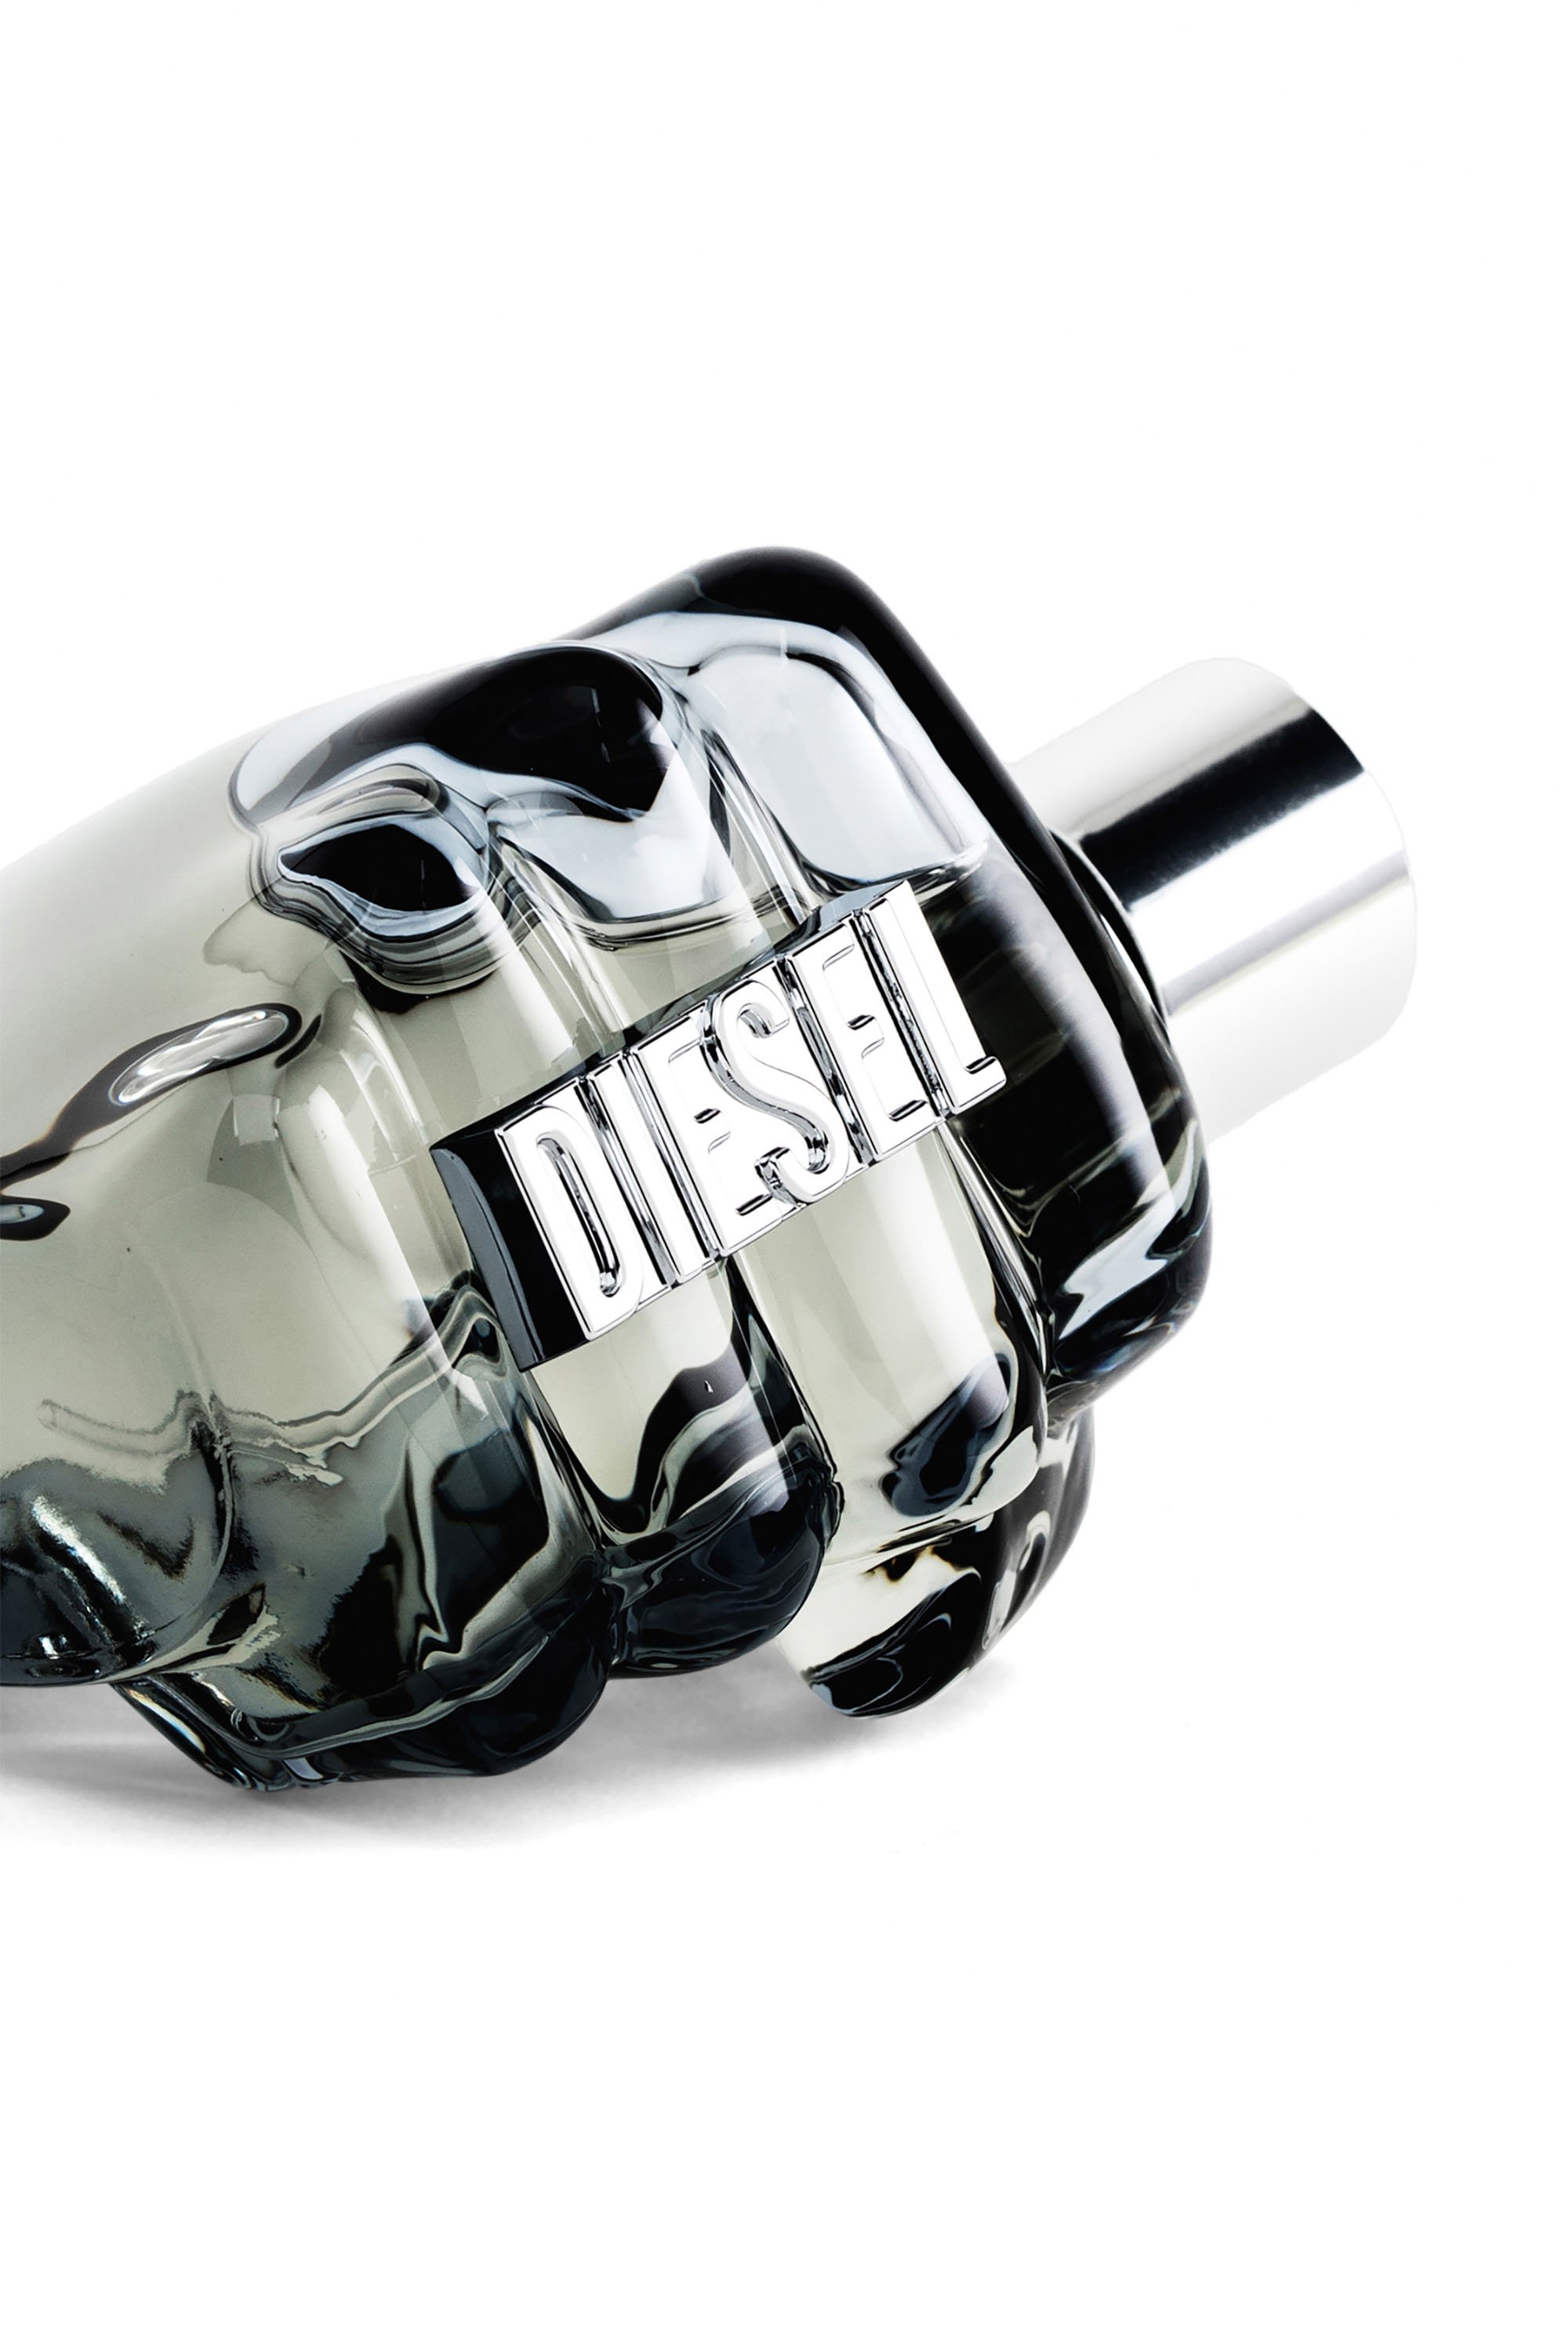 Diesel - ONLY THE BRAVE 50ML, White - Image 3